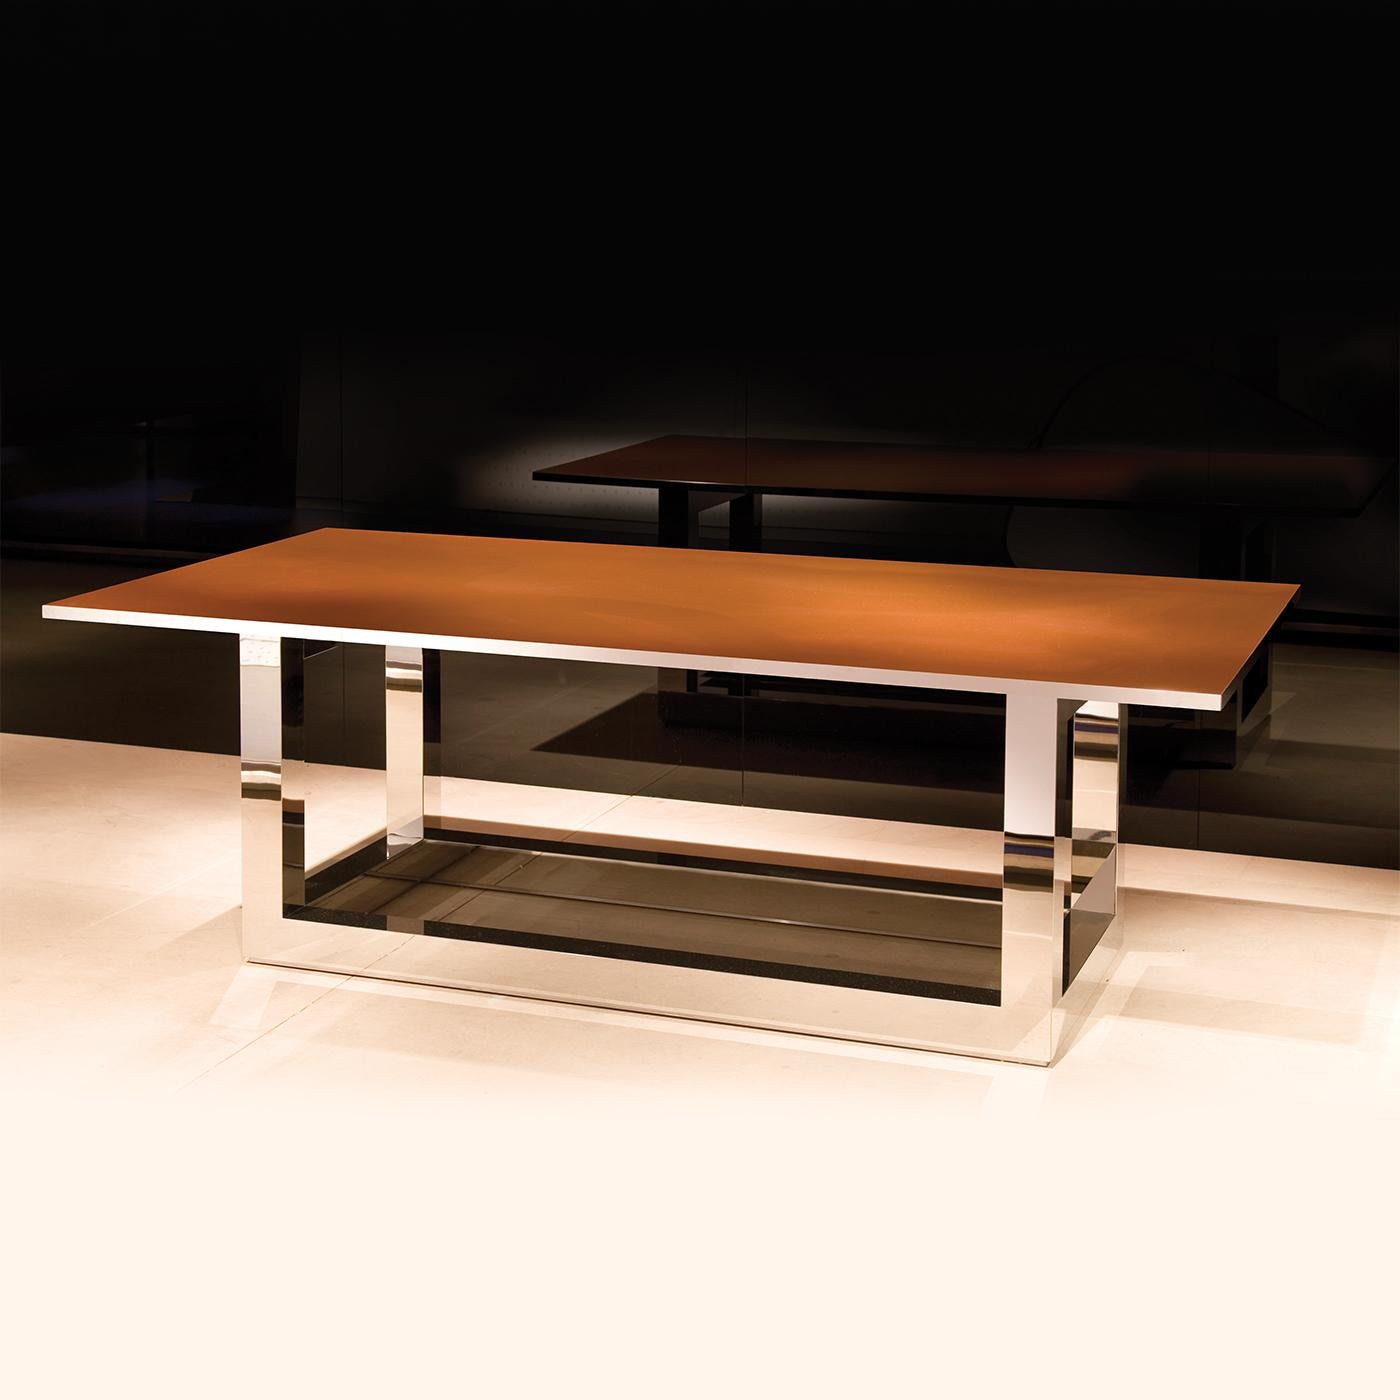 Stunning in its simplicity, the Ginza table features a sturdy structure in polished stainless steel, complimented with a spectacular natural copper tabletop, with the edges around the rectangular top also in polished stainless steel to beautifully